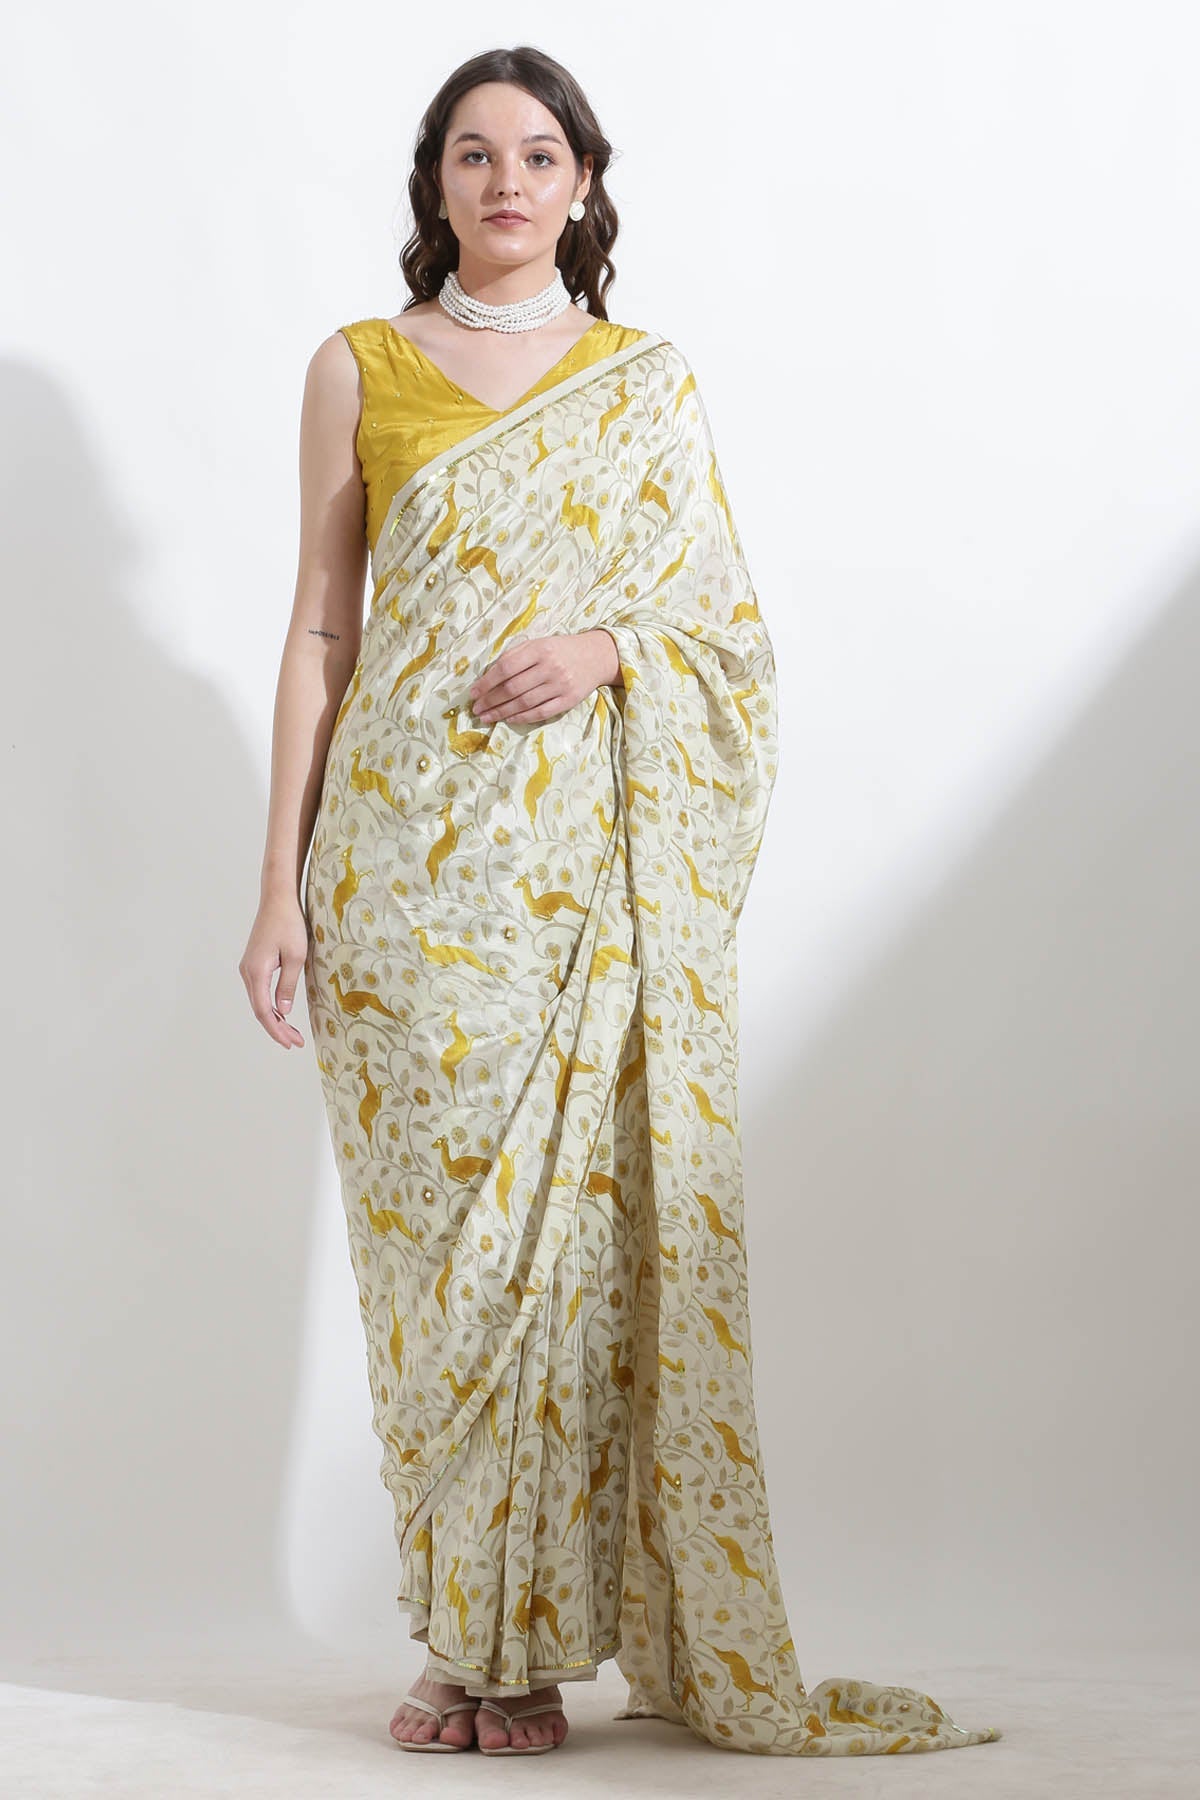 Designer Kusmi Sunlit Tapestry: Flowing Crepe Saree with Delicate Pearls For Women at ScrollnShops